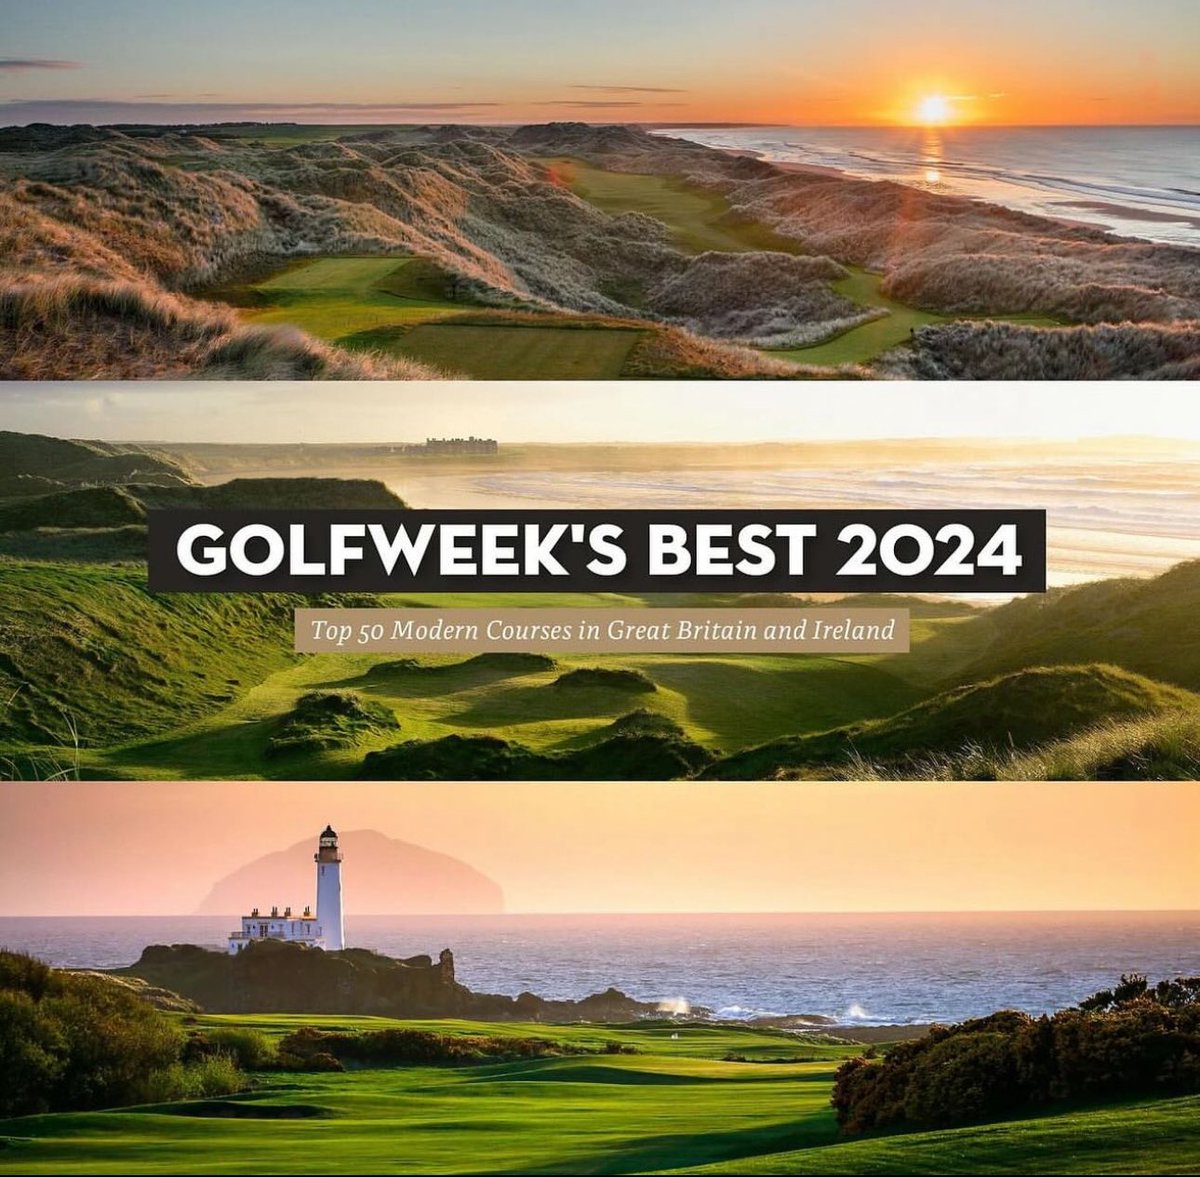 Trifecta!!!! Congratulations to our amazing teams at @trumpscotland, @trumpireland and @TrumpTurnberry for being ranked No. 2, No. 18 and No. 25 in Golfweek’s Best Courses in Great Britain and Ireland! #Golf #Scotland #Ireland #Golfweek